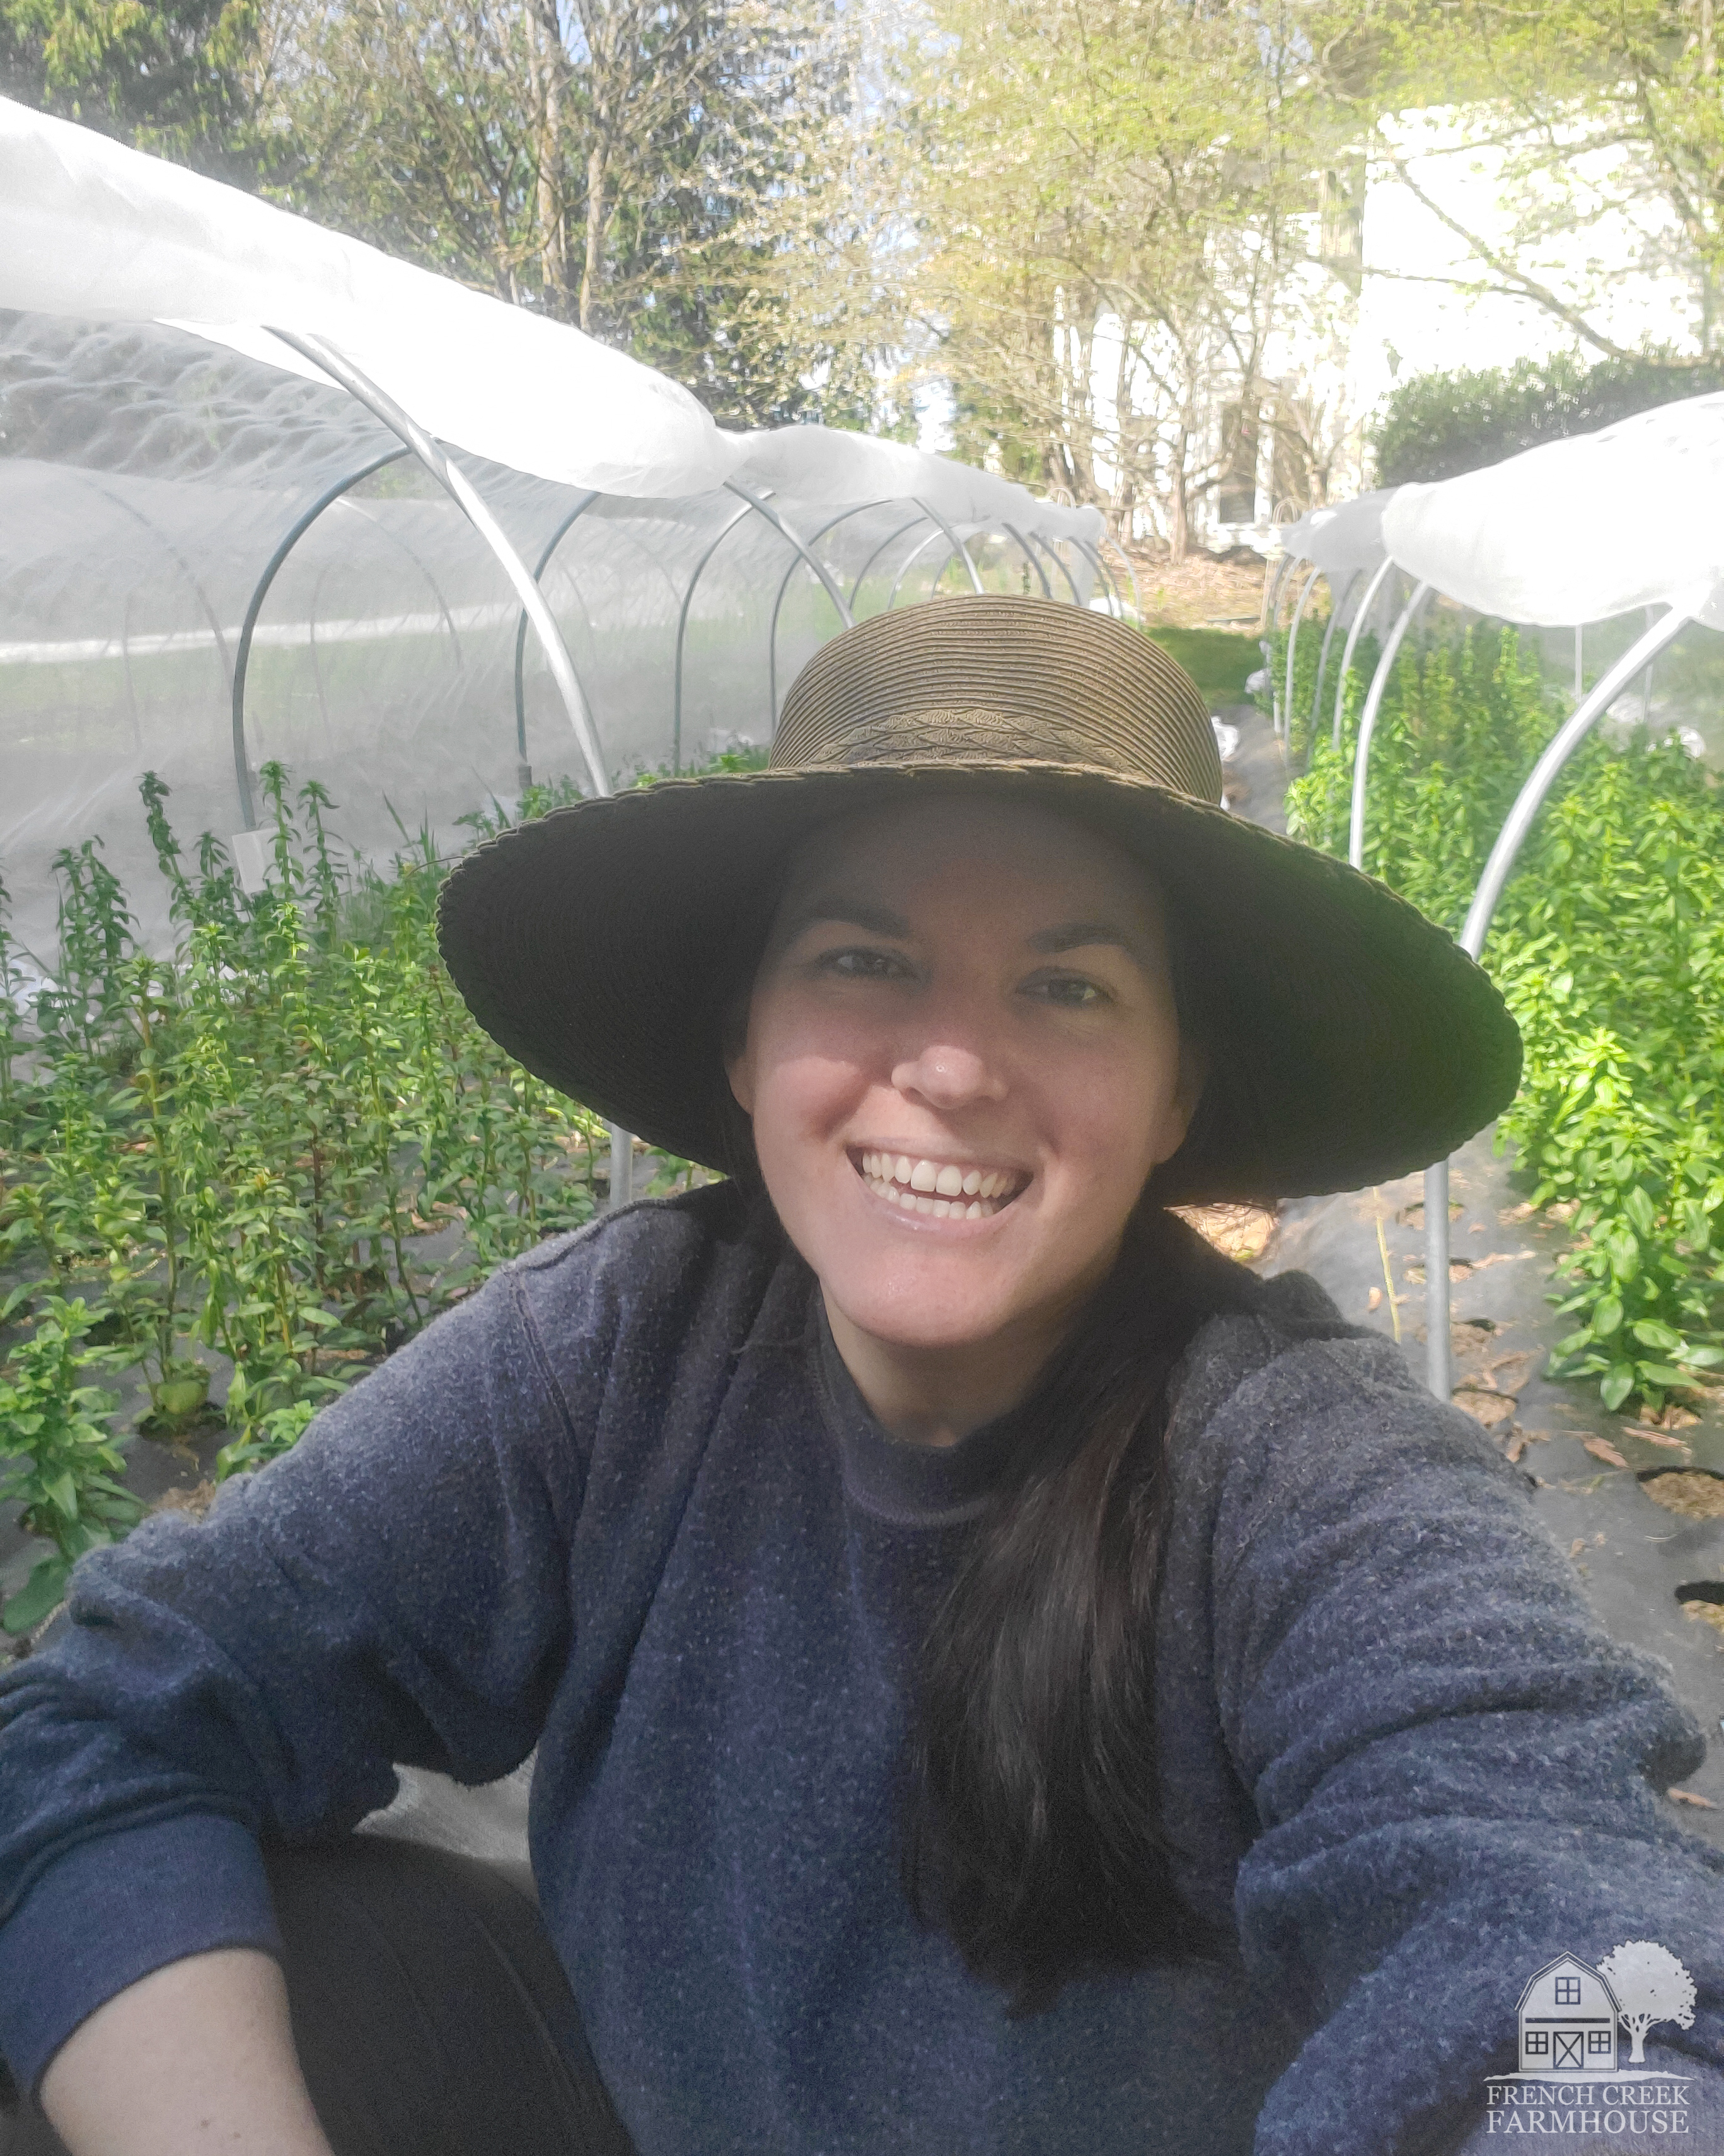 What farming and self-reliance means to me